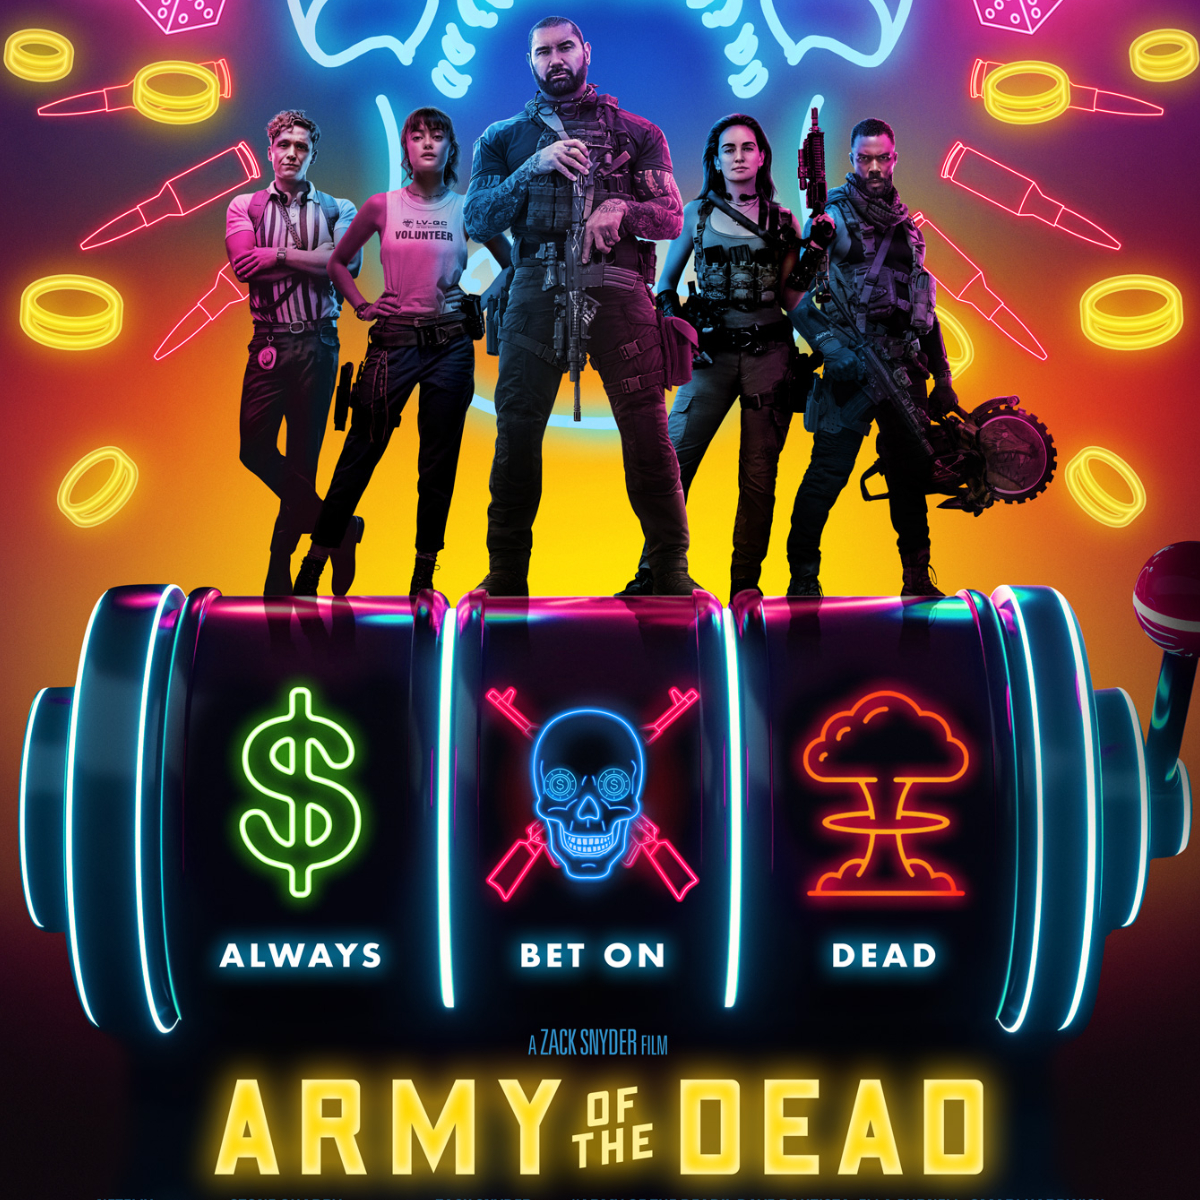 Army of the Dead released today, i.e. May 21